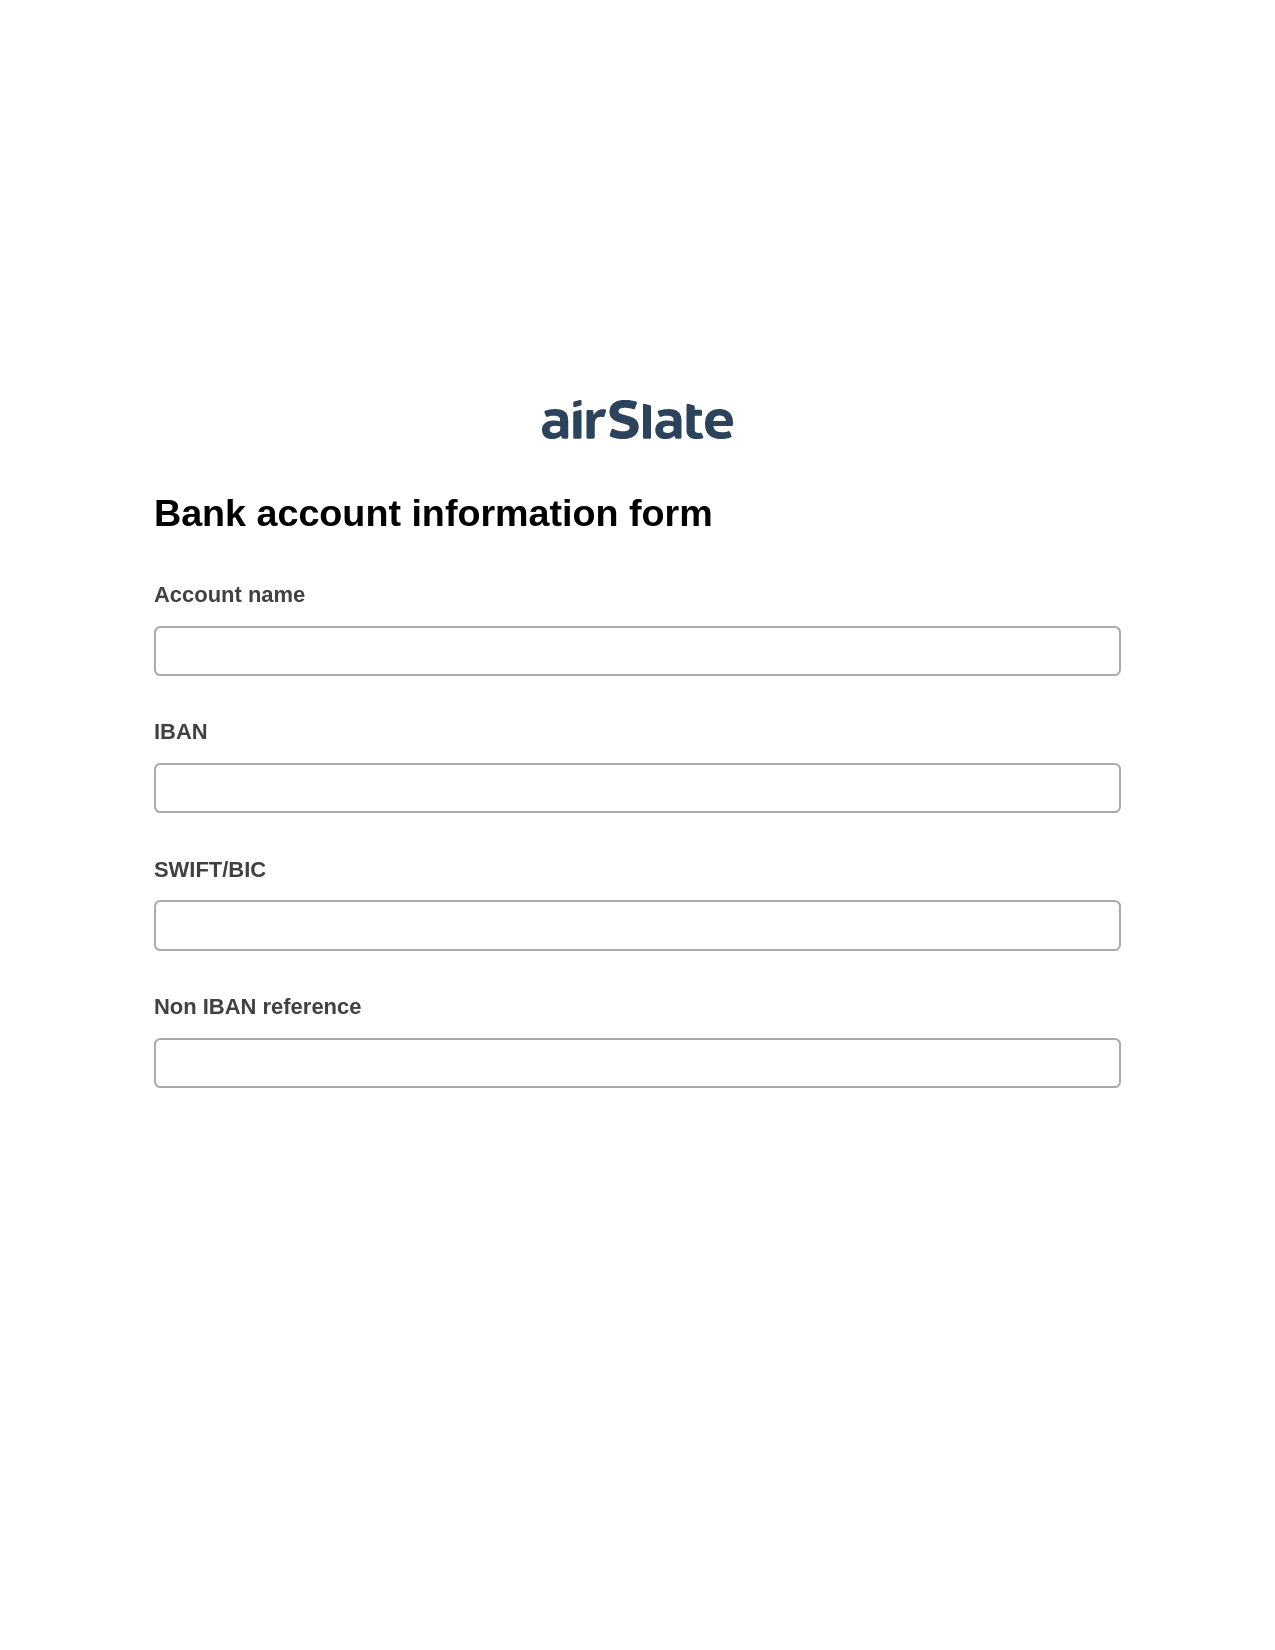 Multirole Bank account information form Pre-fill from Google Sheet Dropdown Options Bot, Create Slate from another Flow Bot, Export to Formstack Documents Bot